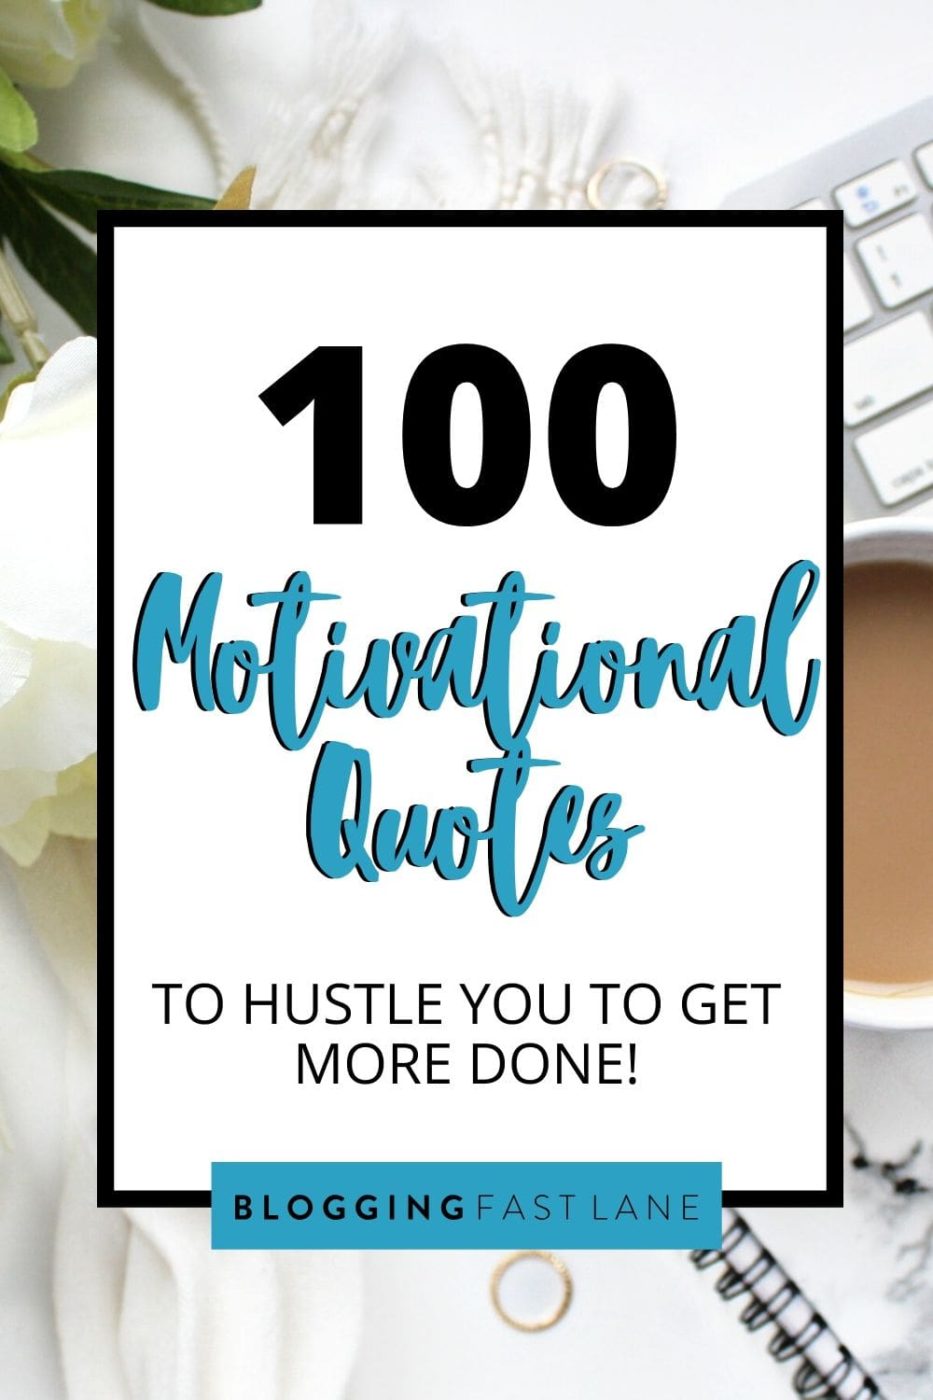 Motivational Quotes to Help You Hustle Hard | Looking for a boost in your motivation? Check out our epic list of 100 hustle quotes to help you get more done!